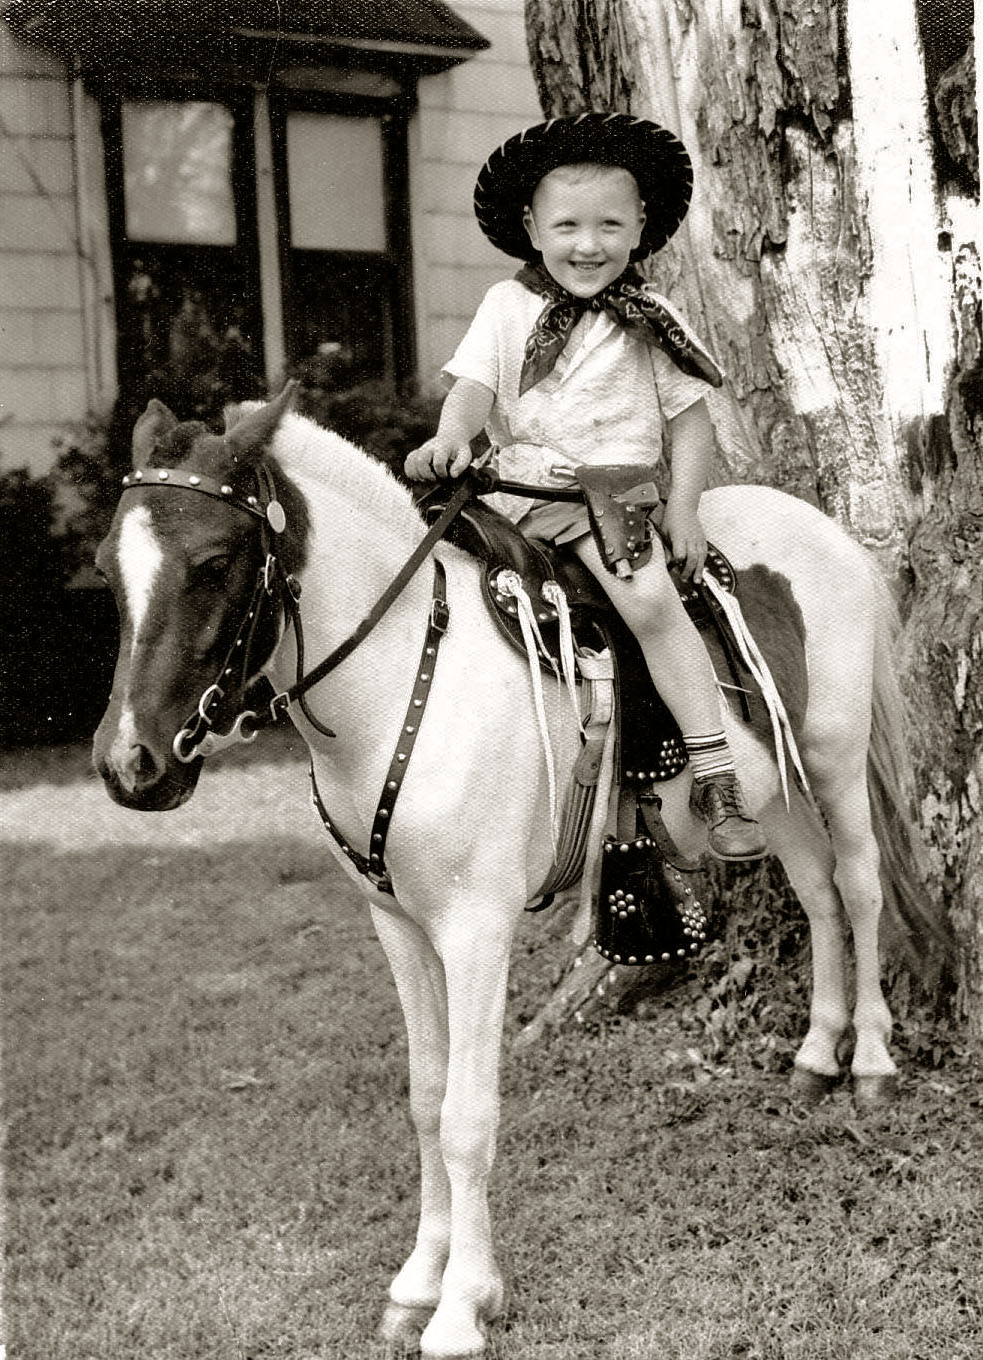 A typical kid picture from the 1950's, courtesy of a door-to-door photographer and his pony. In a few weeks he'd come back around with the finished pictures! View full size.